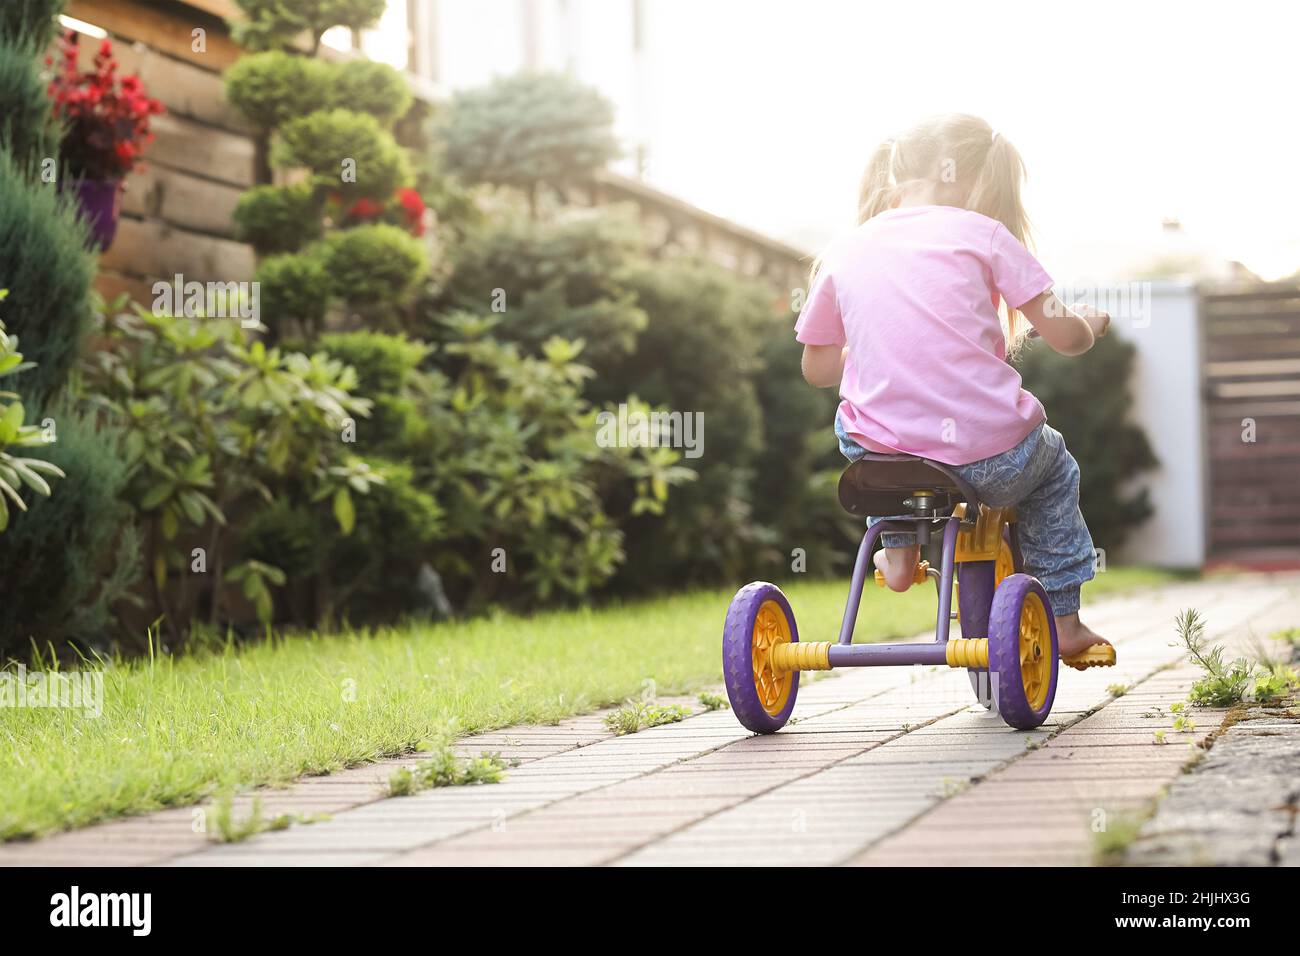 little girl rides purple children's bicycle in the garden on a sunny summer day Stock Photo